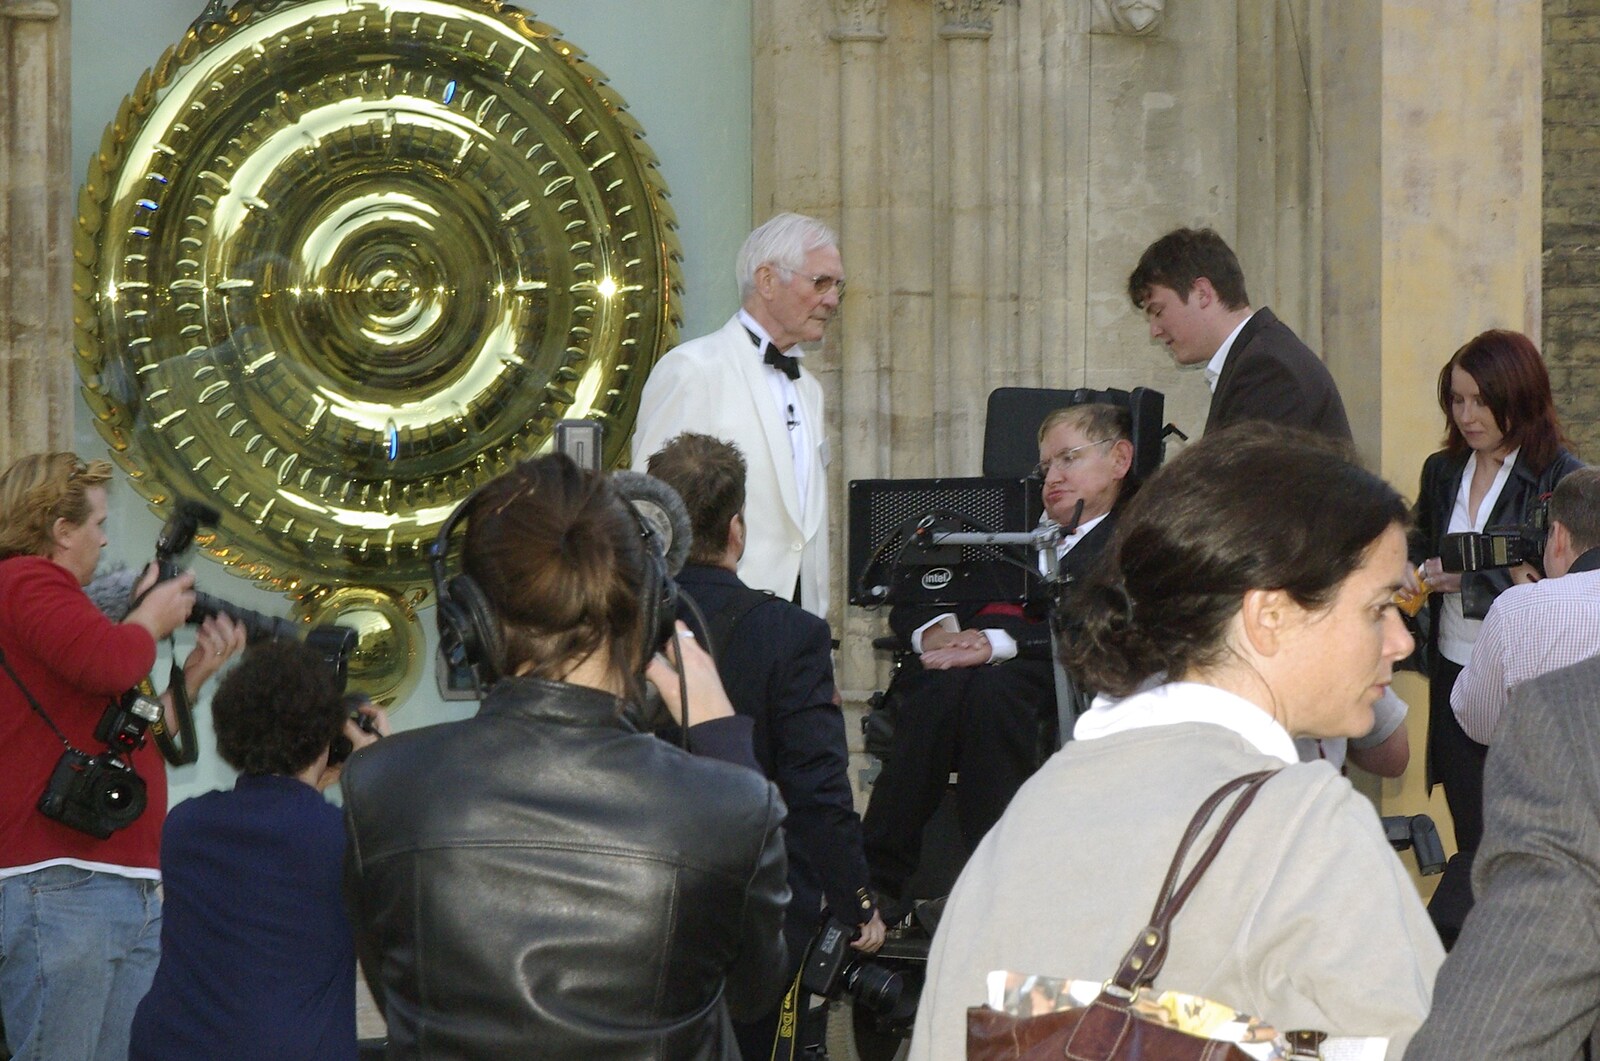 A Brief Time in History: Stephen Hawking and the Corpus Christi Clock, Benet Street, Cambridge - 19th September 2008: John Taylor and Stephen Hawking